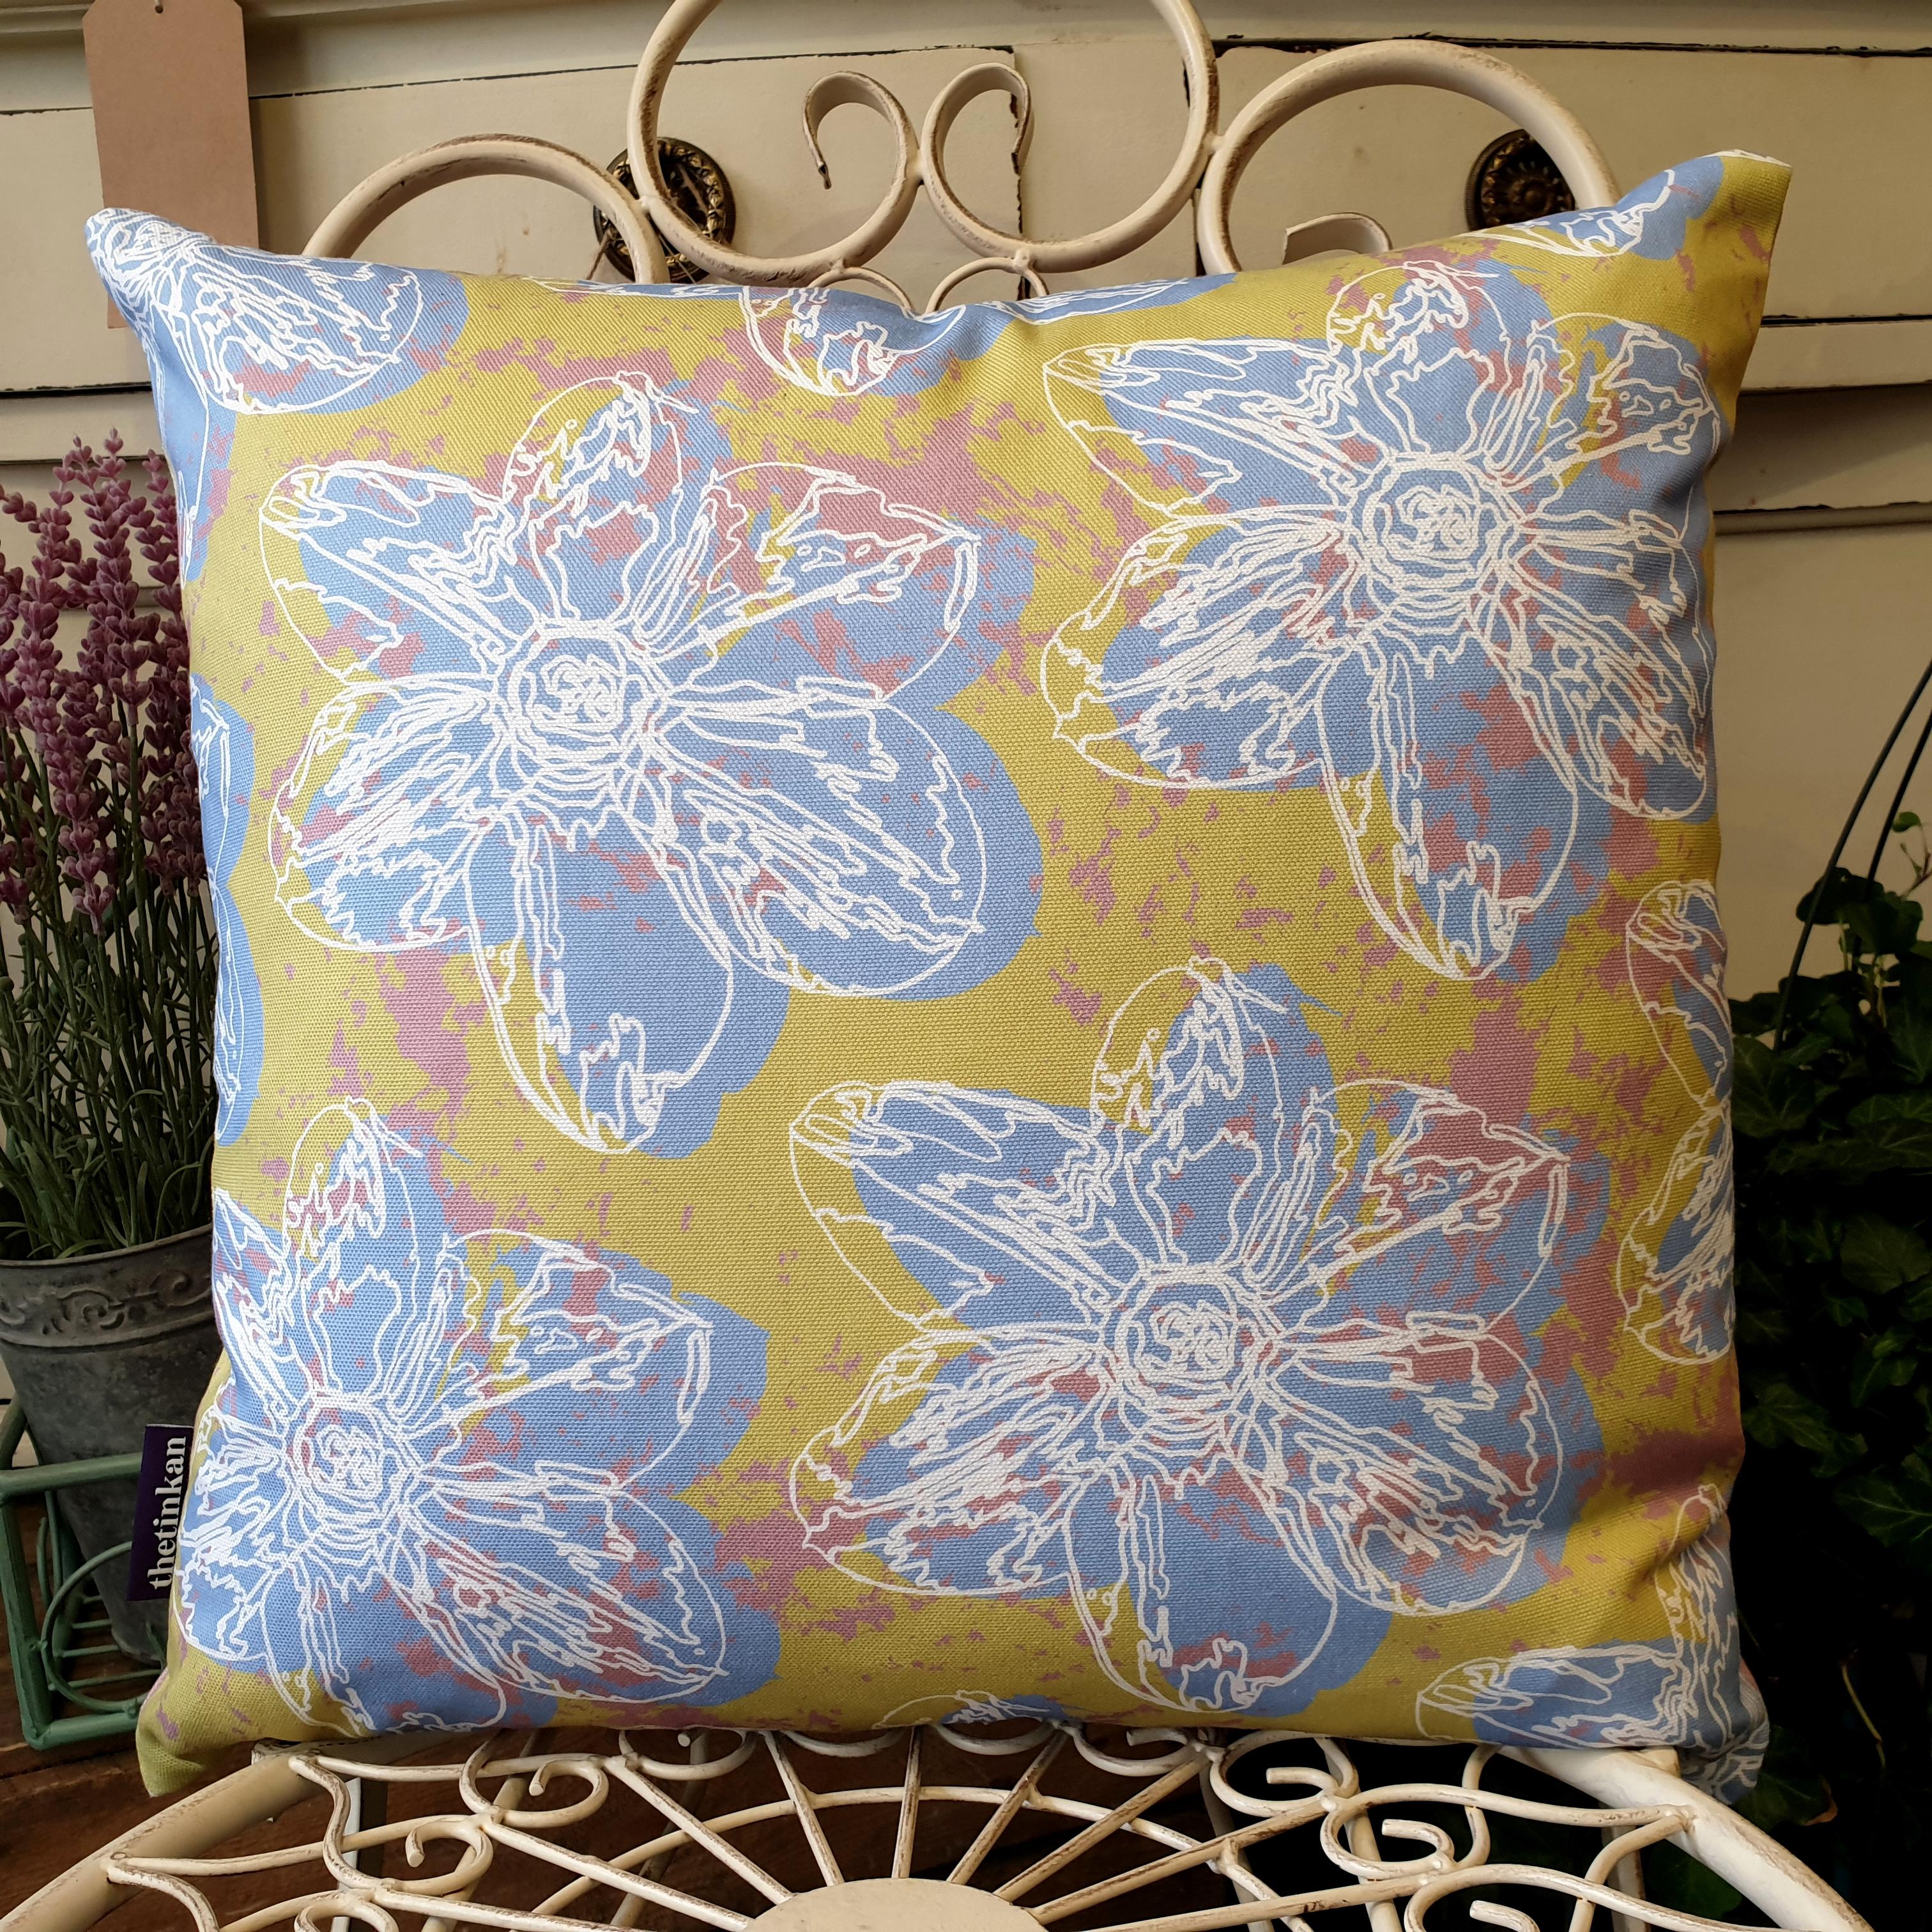 Double-sided 45cm square Flower Splash cushion designed by thetinkan. Pale blue narcissus flower with white traced outline set within a light olive green background with salmon pink paint splashes. Available with an optional luxury cushion inner pad. VIEW PRODUCT >>